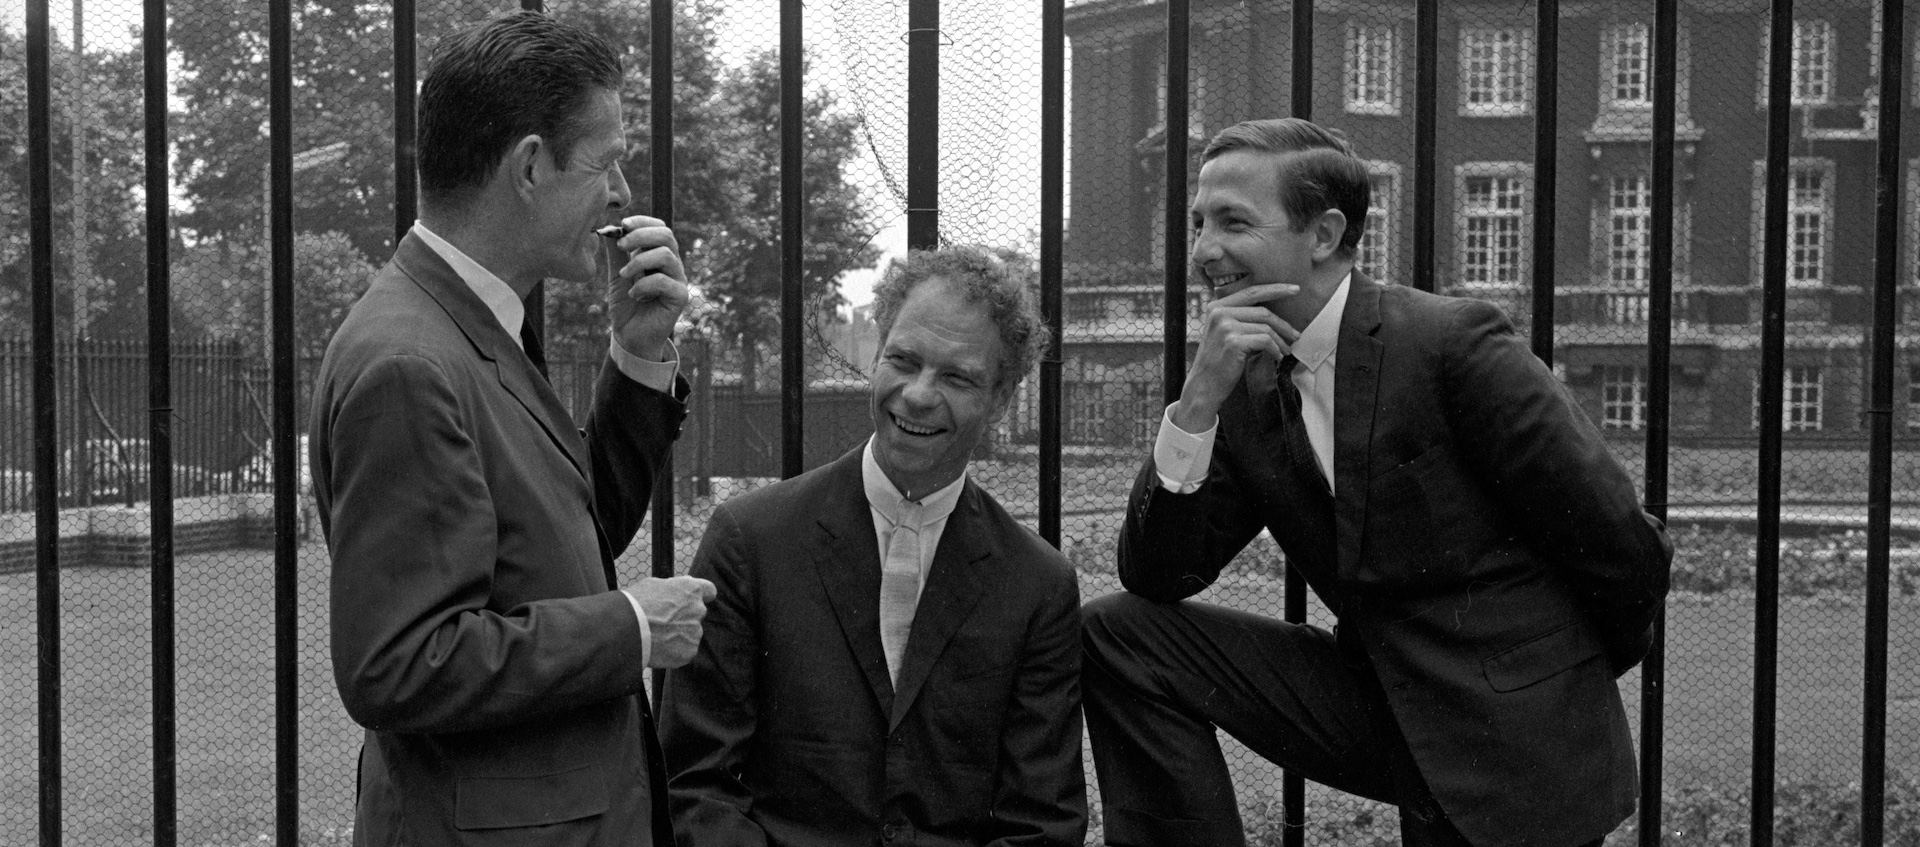 A black and white image of choreographer Merce Cunningham sitting against a tall iron fence, looking at the camera. He sits between composer John Cage and artist Robert Rauschenberg, who are both standing and facing each other